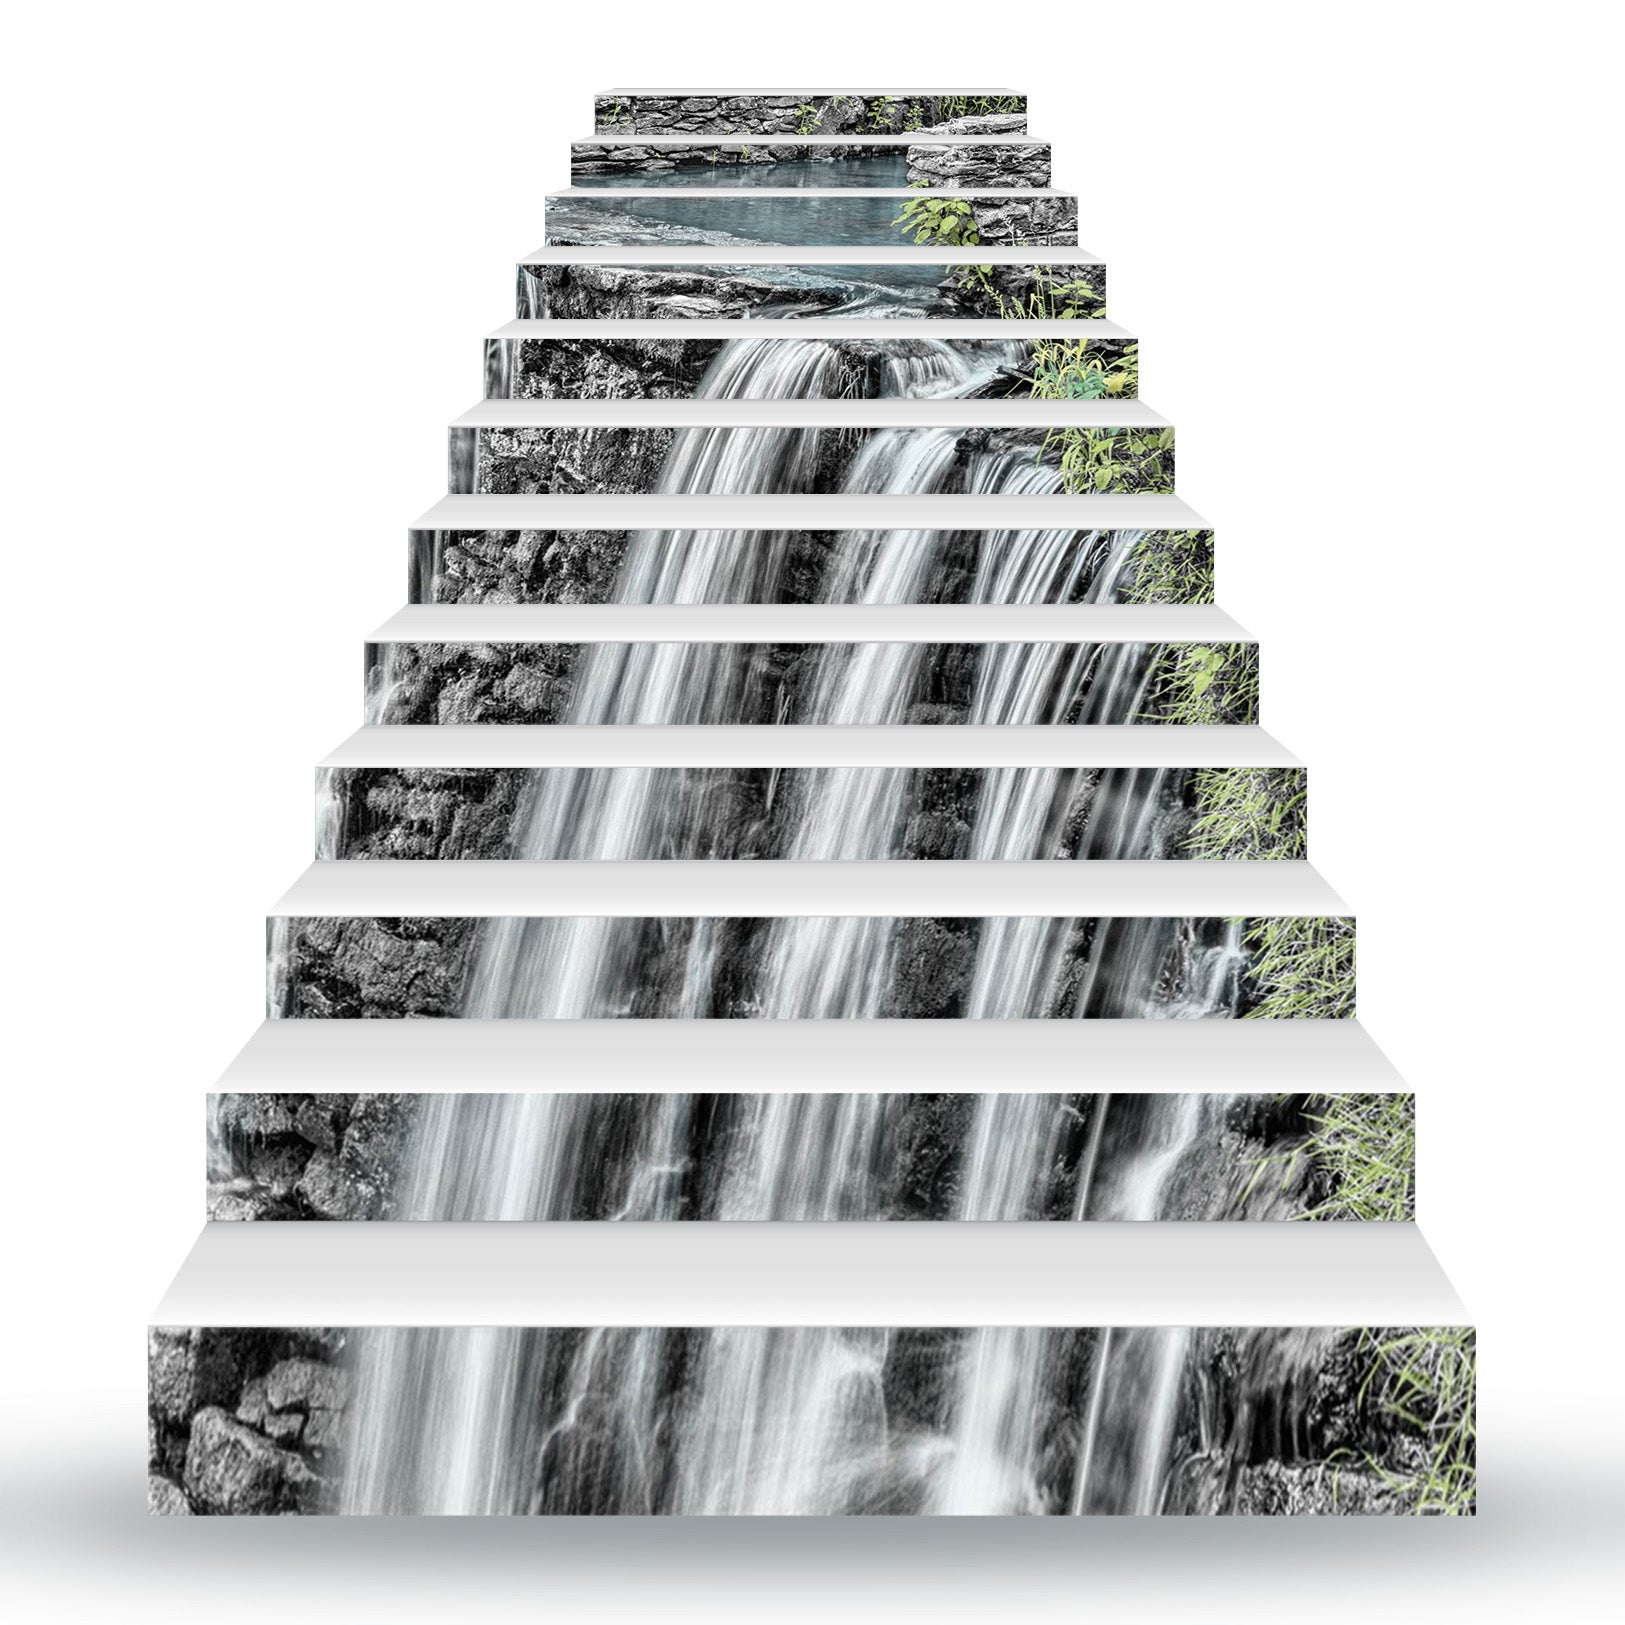 3D Magnificent Waterfall 122 Stair Risers